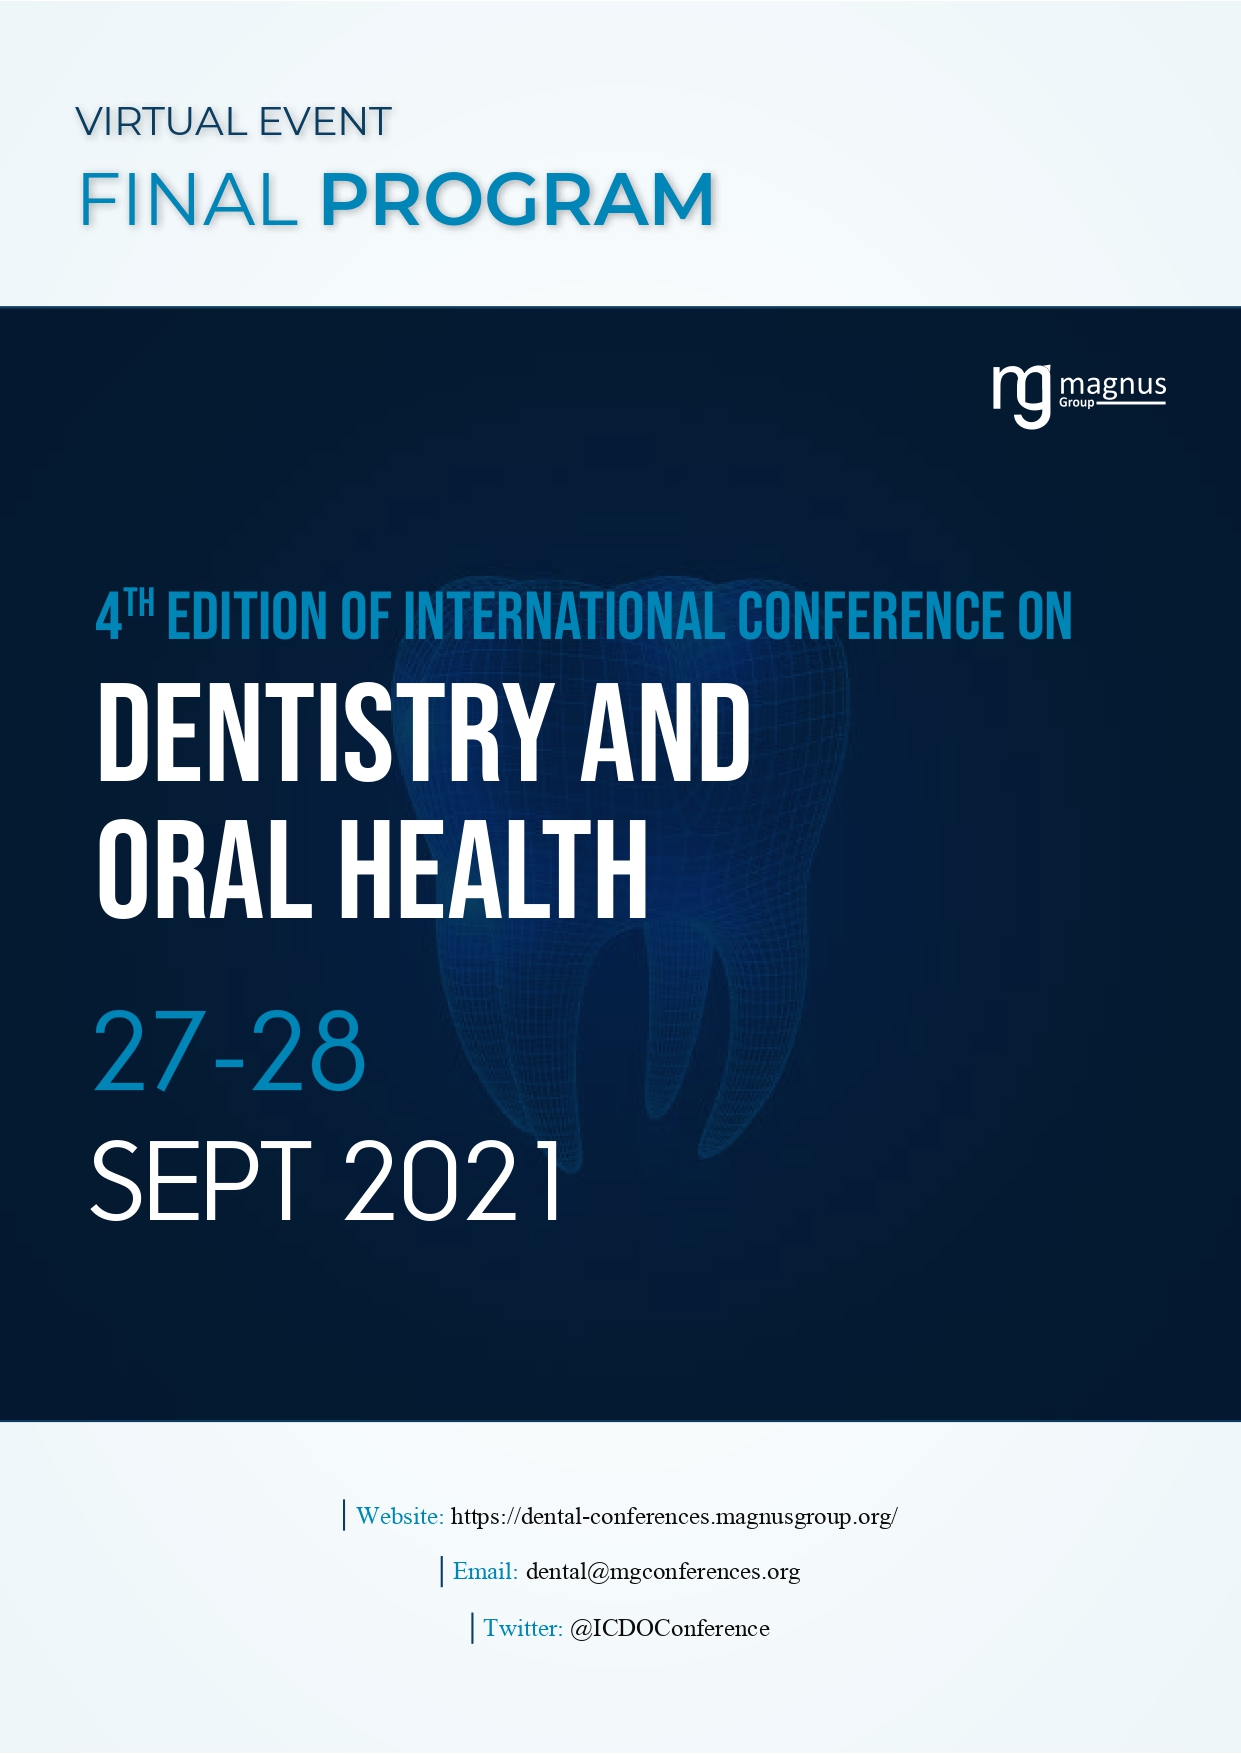 4th Edition of International Conference Dentistry and Oral Health Program